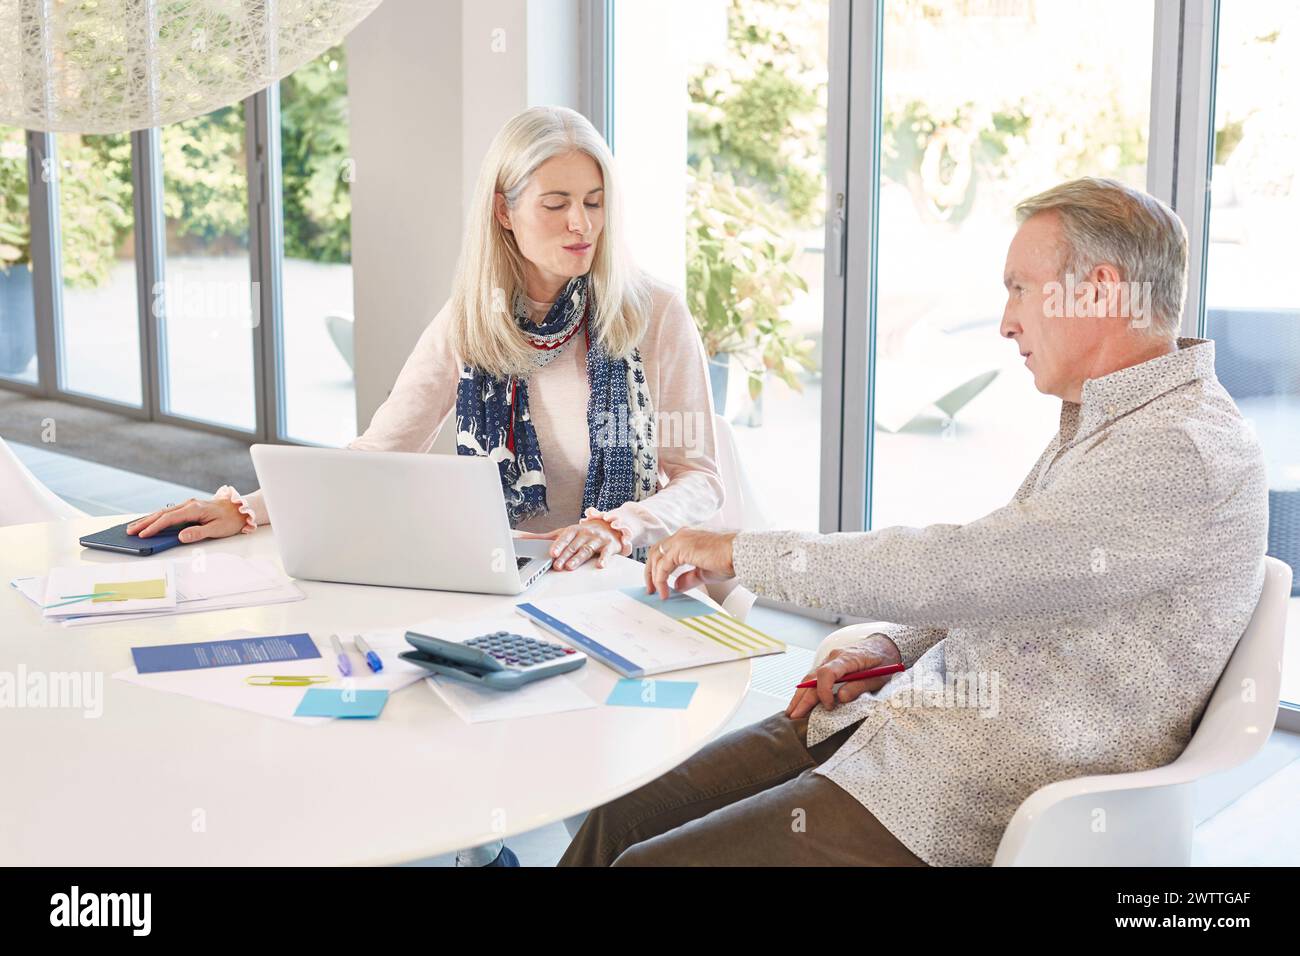 Two professionals working together at a white table Stock Photo